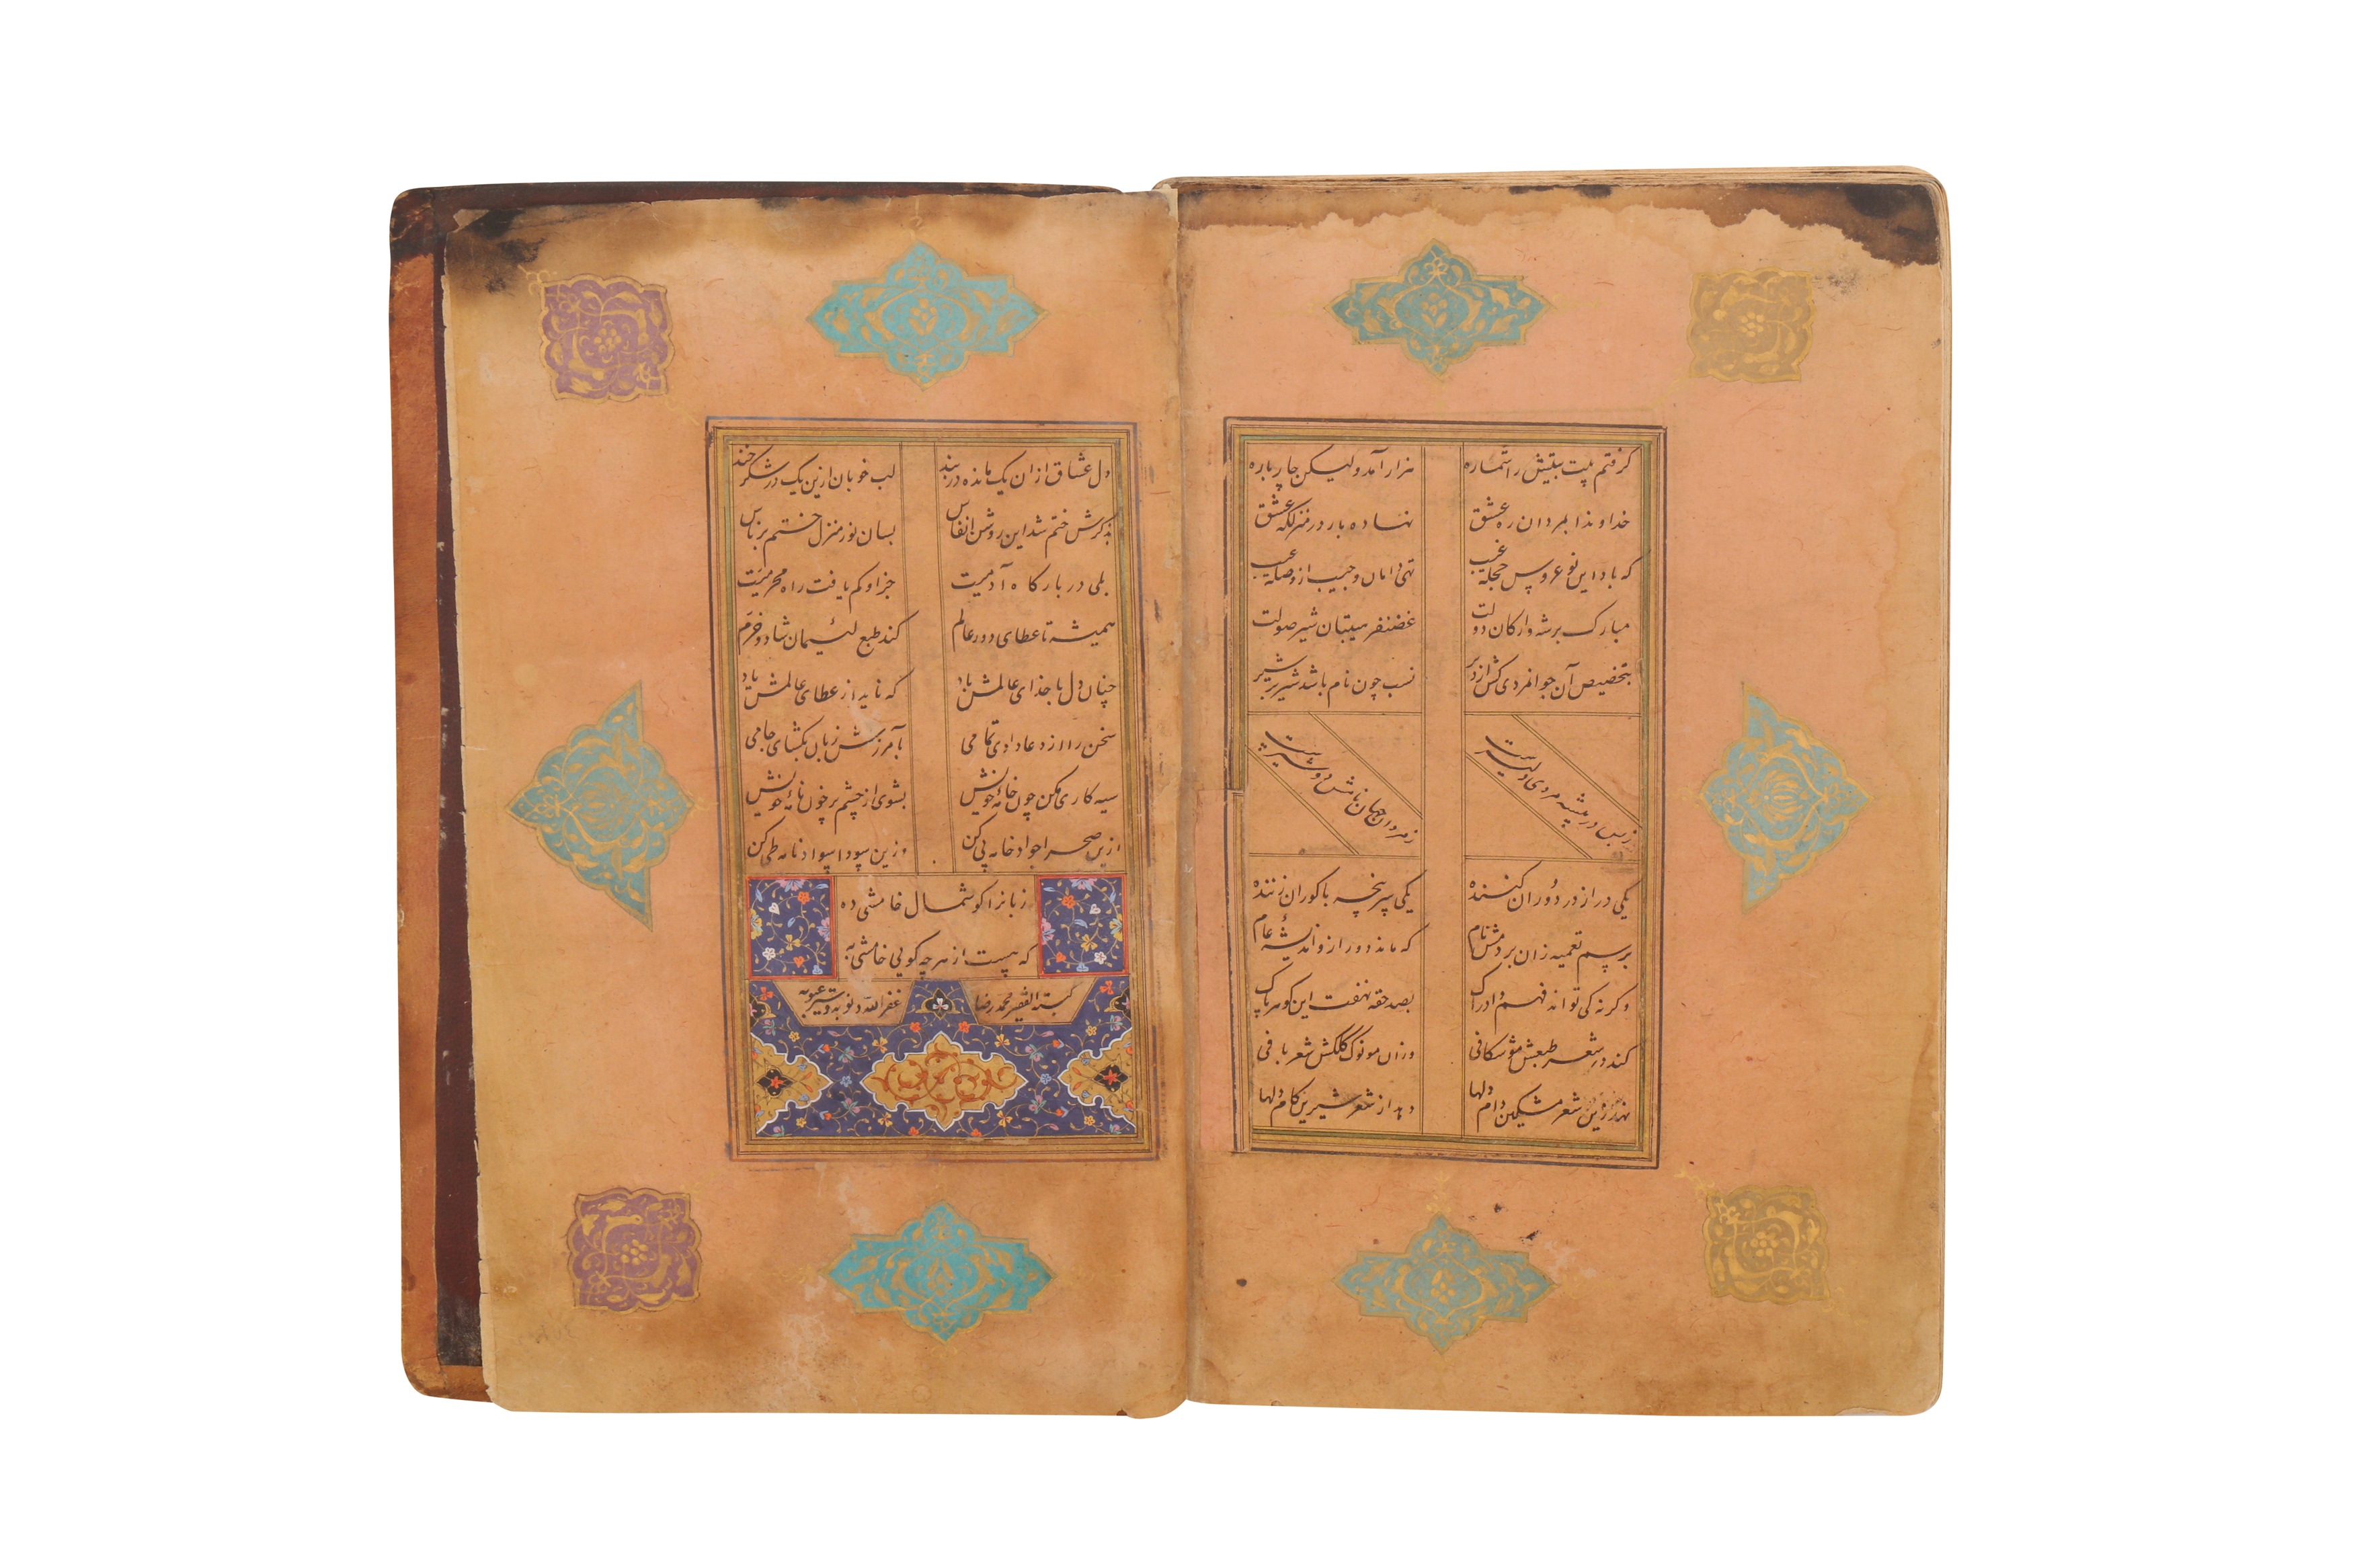 A LATE 16TH/EARLY 17TH CENTURY PERSIAN POETIC MANUSCRIPT - YOUSUF AND ZULAIKA, HAFT AWRANG OF JAMI - Image 3 of 6